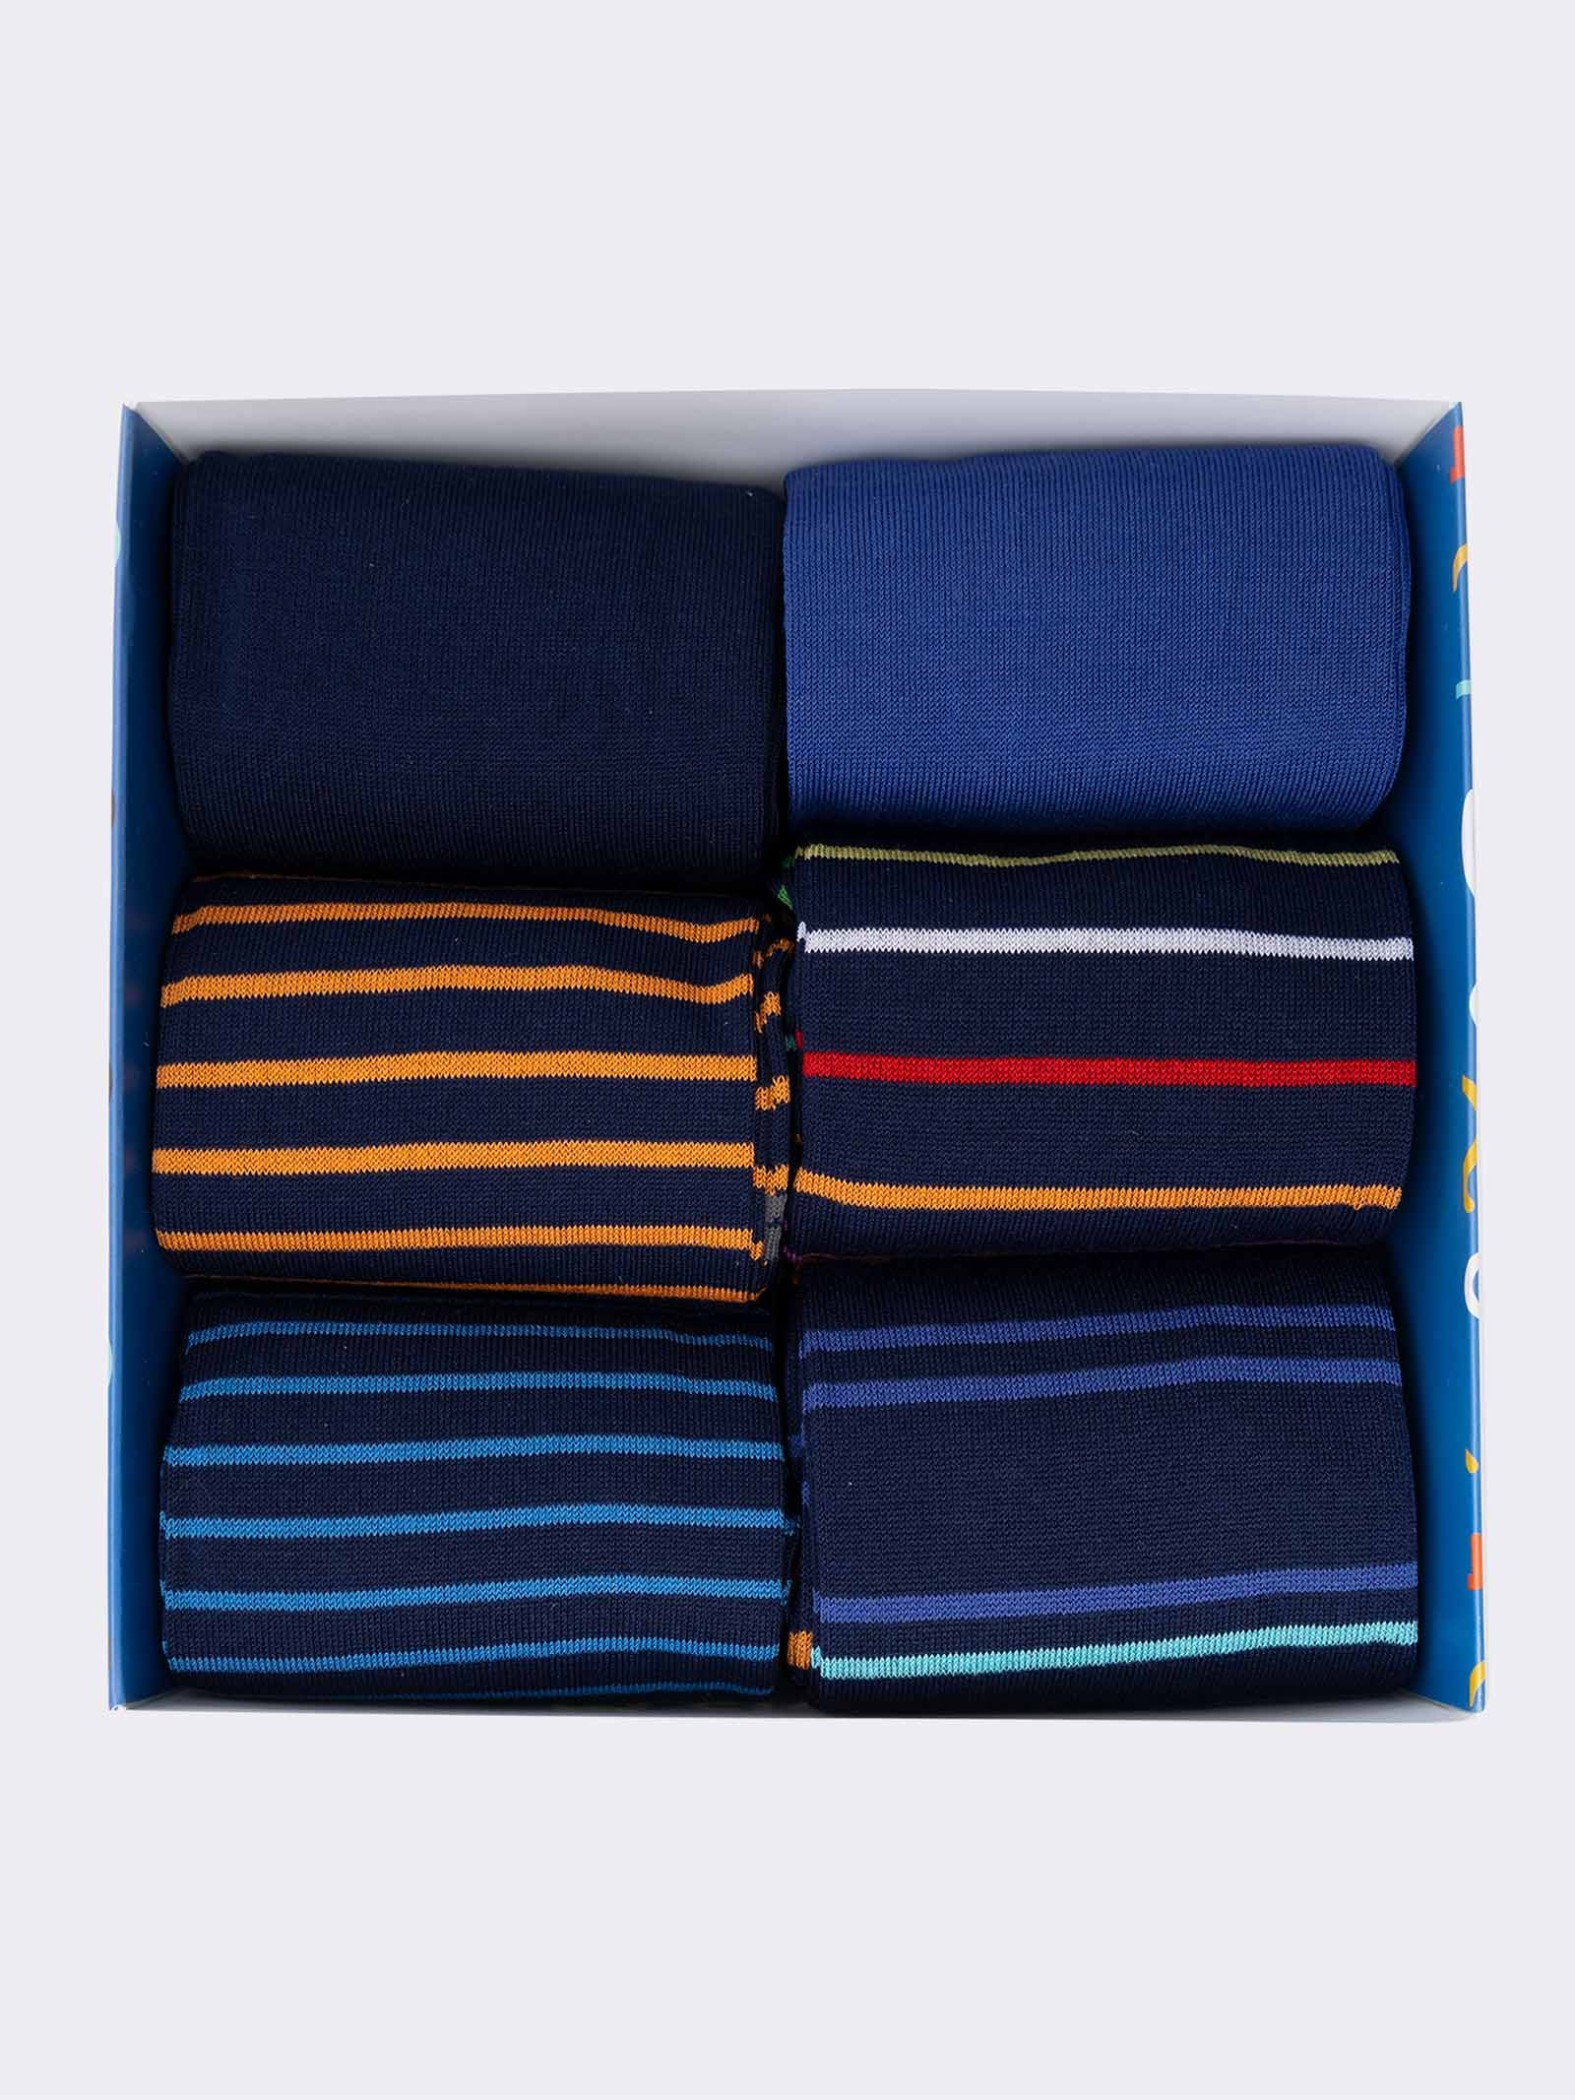 Gift Box with 6 Pairs of Men's Long Striped Pattern Socks in Fresh Cotton